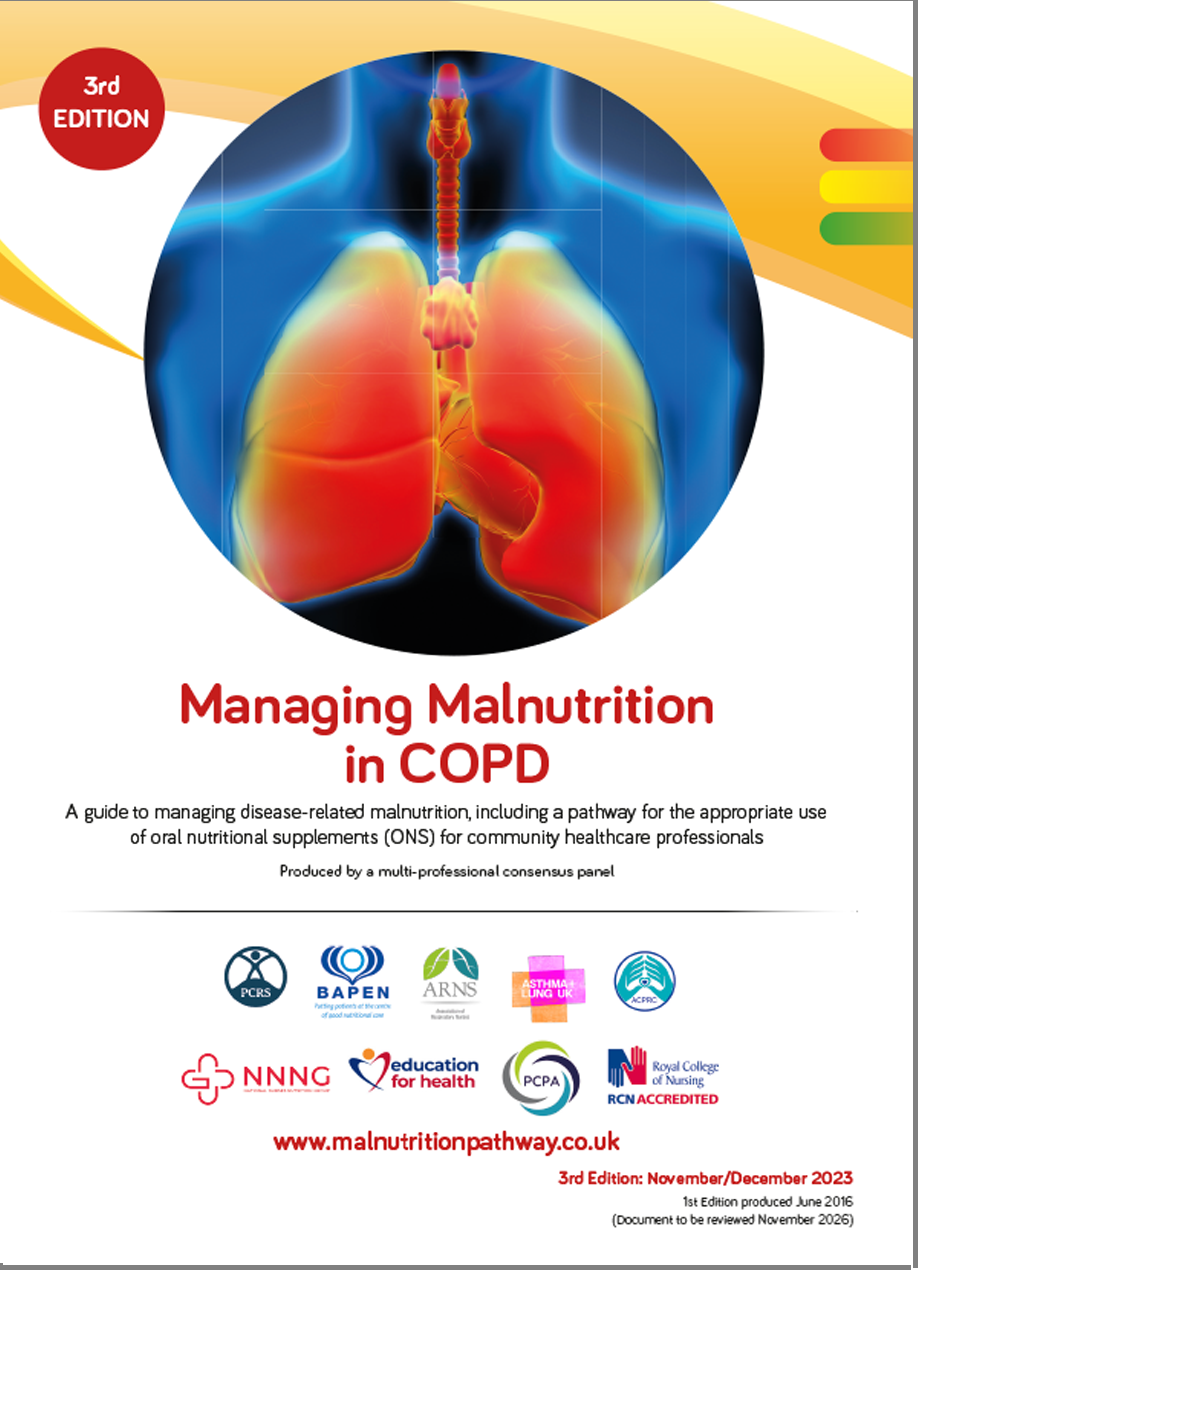 Managing Malnutrition in copd